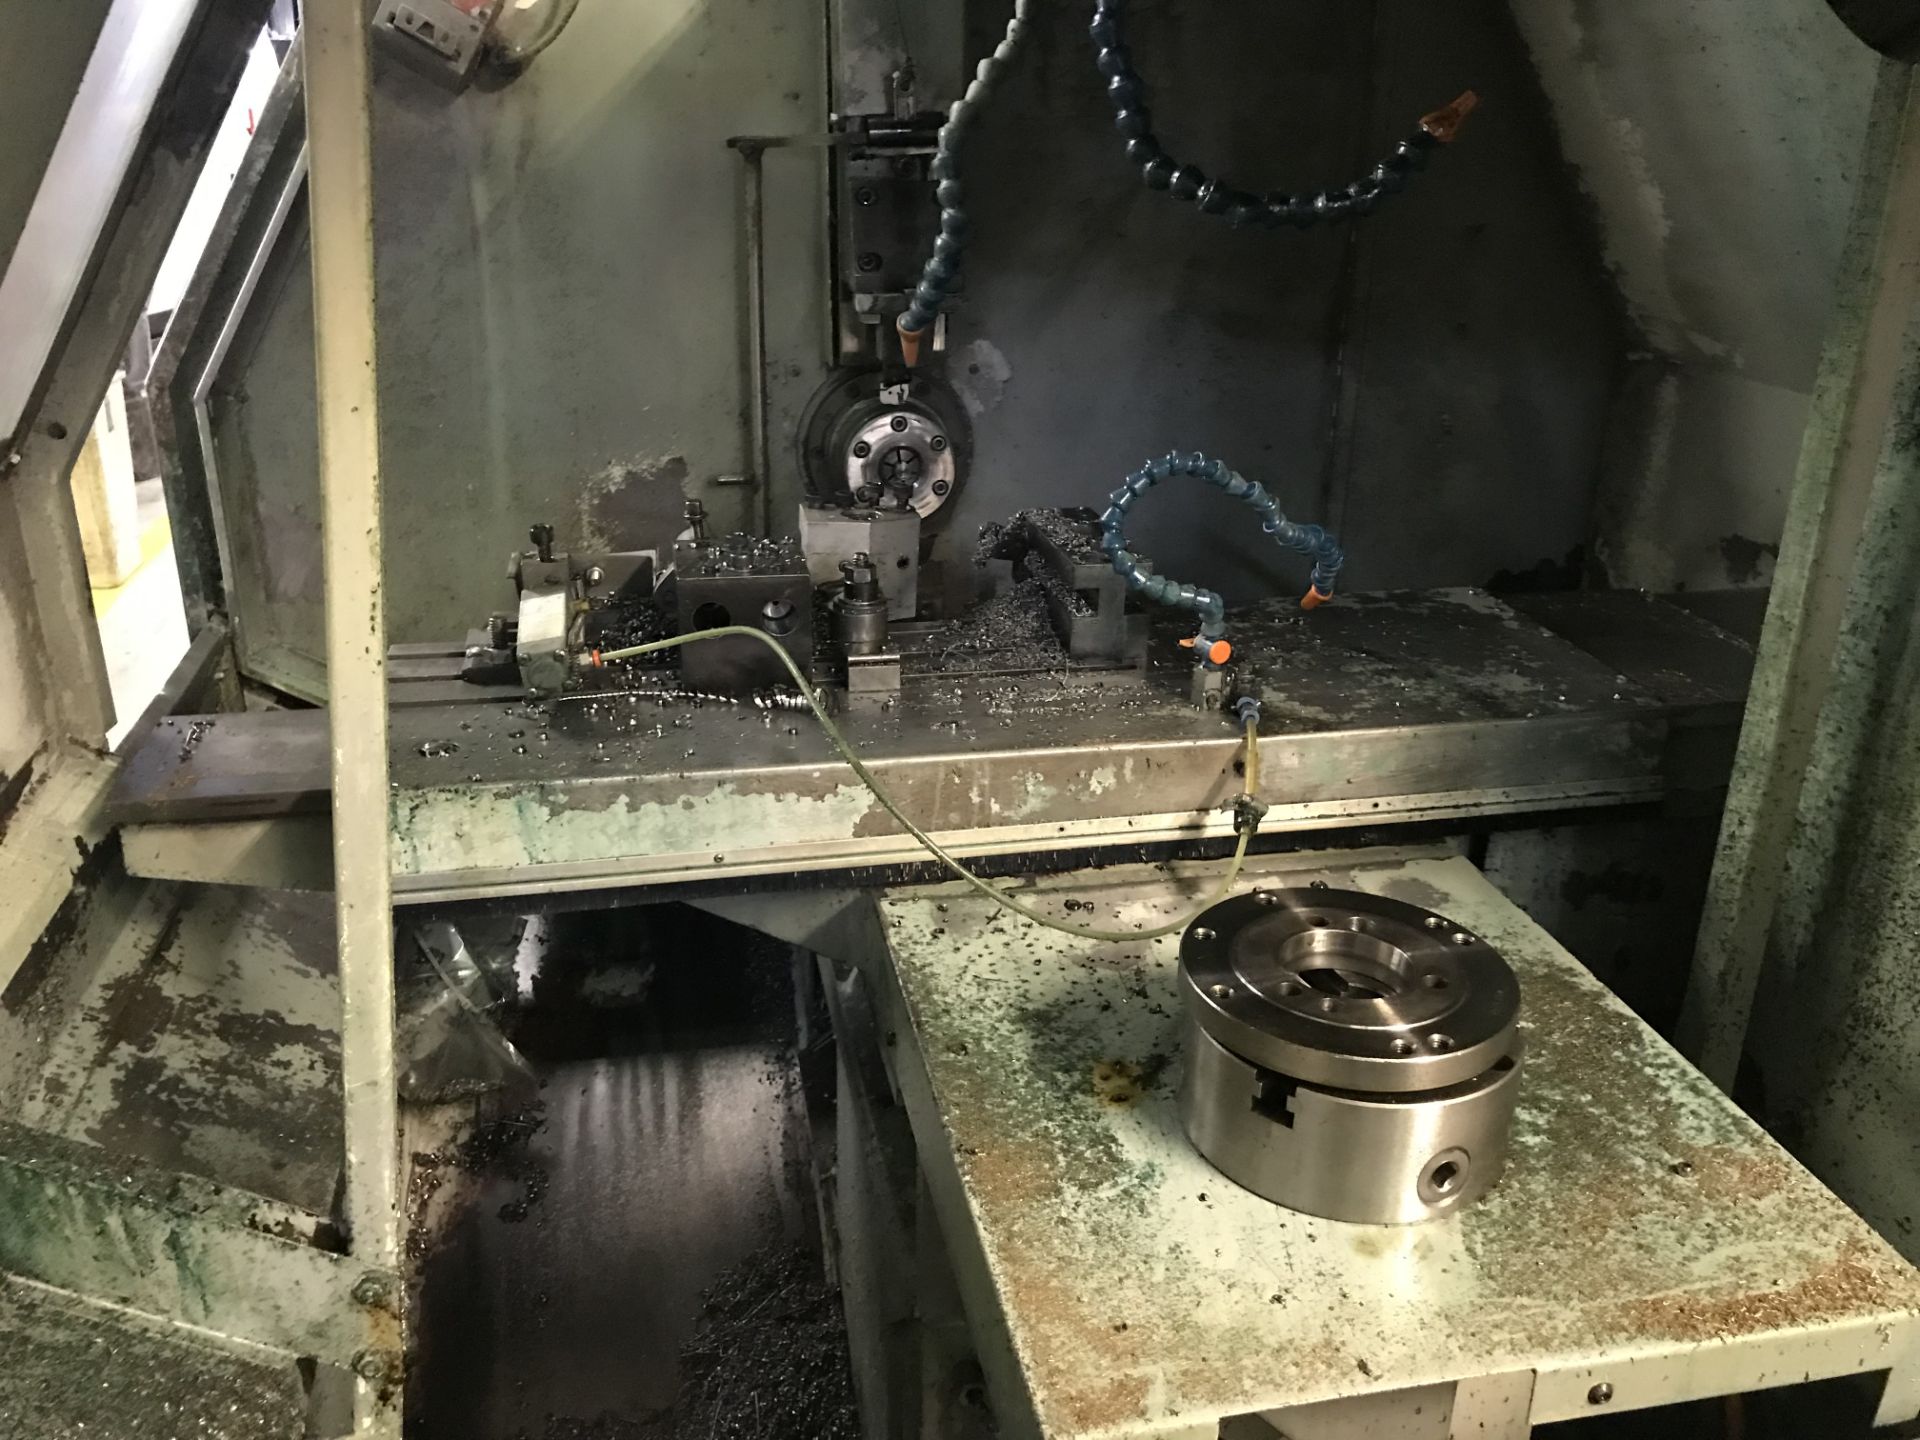 EMI-MEC, Super Sprint 30 CNC Lathe Collet ChuckMulti-Station Cross Slide For Turning And Boring To - Image 2 of 4